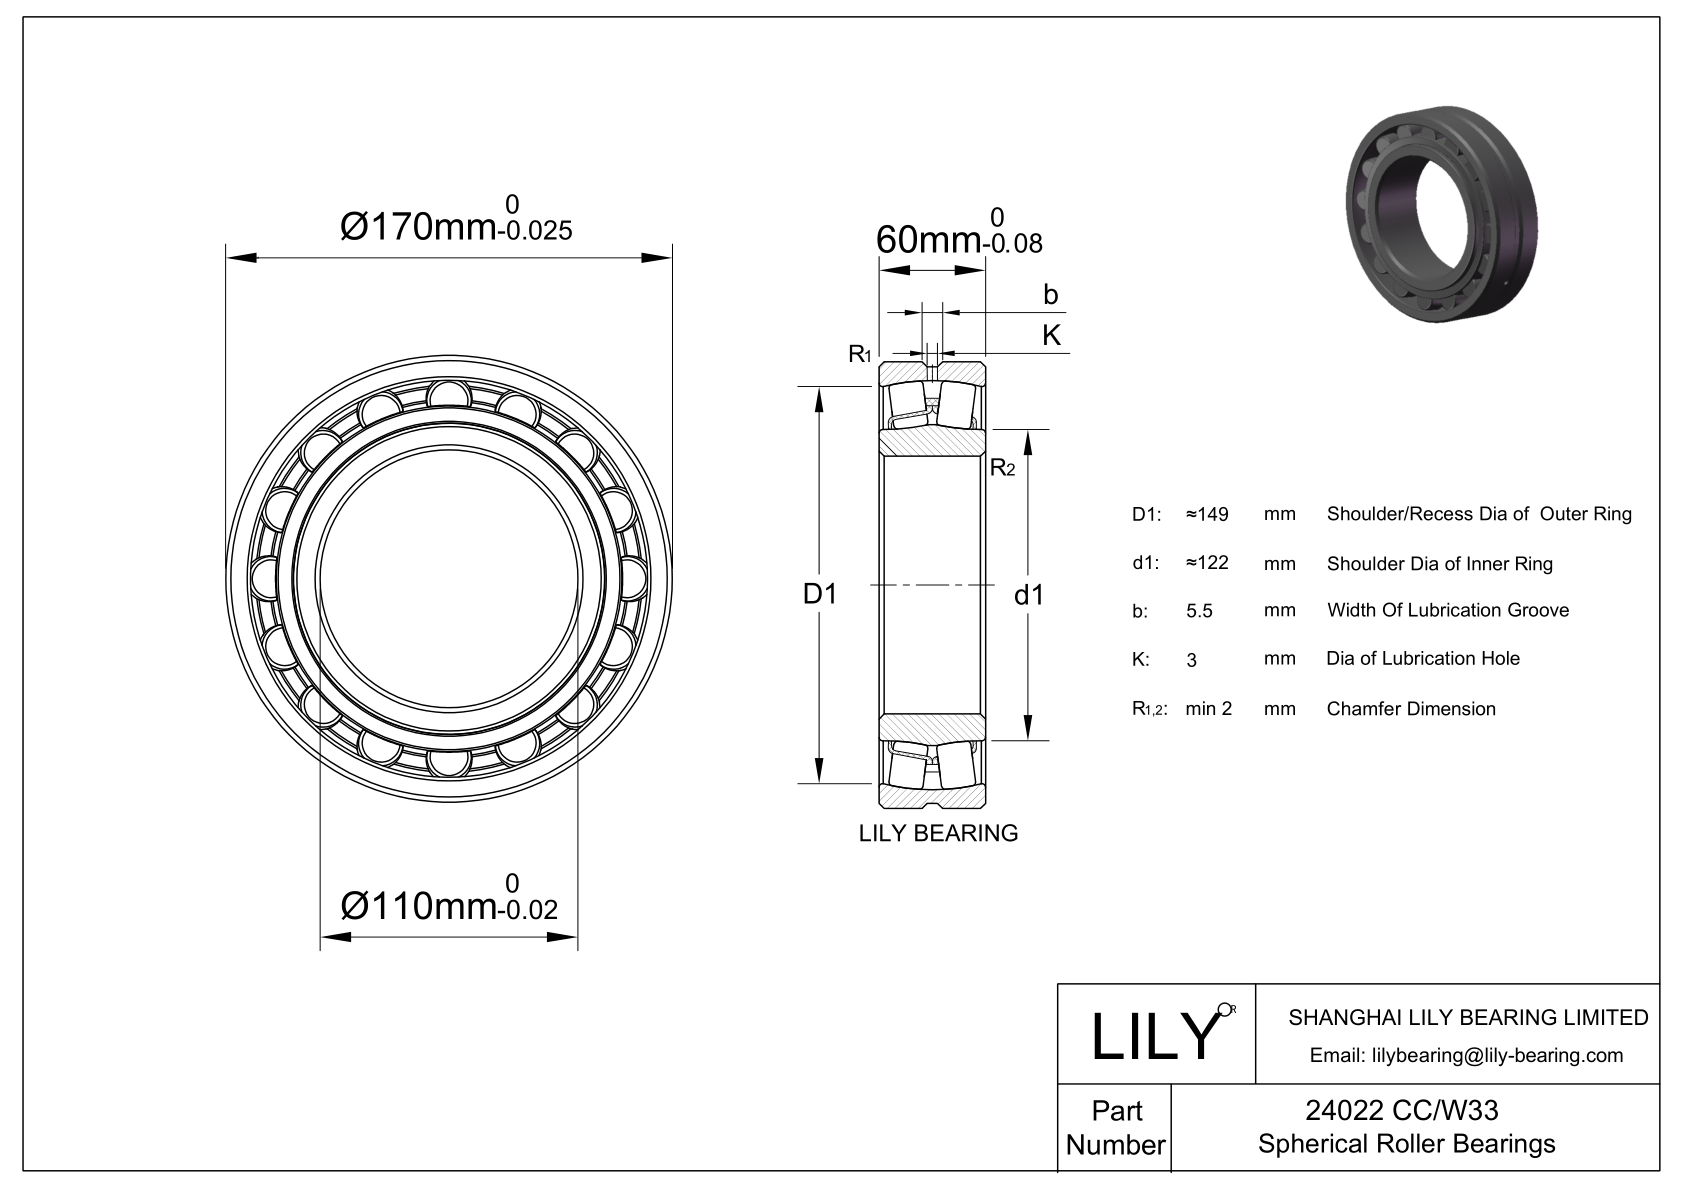 24022 CC/W33 Double Row Spherical Roller Bearing cad drawing